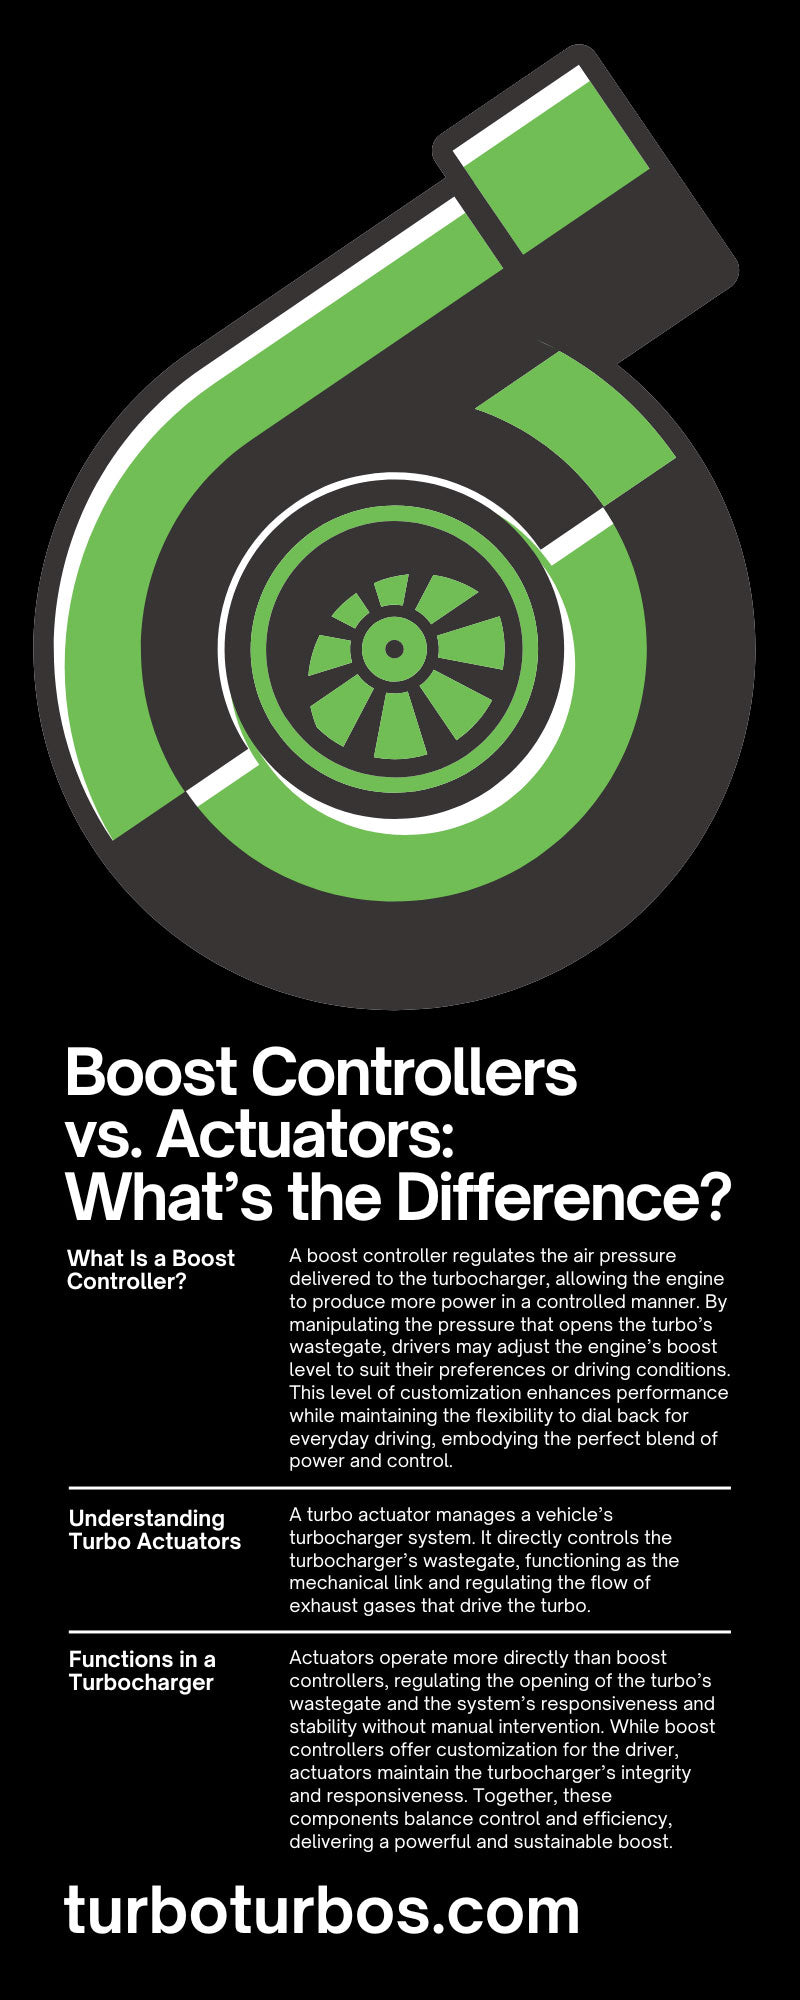 Boost Controllers vs. Actuators: What’s the Difference?